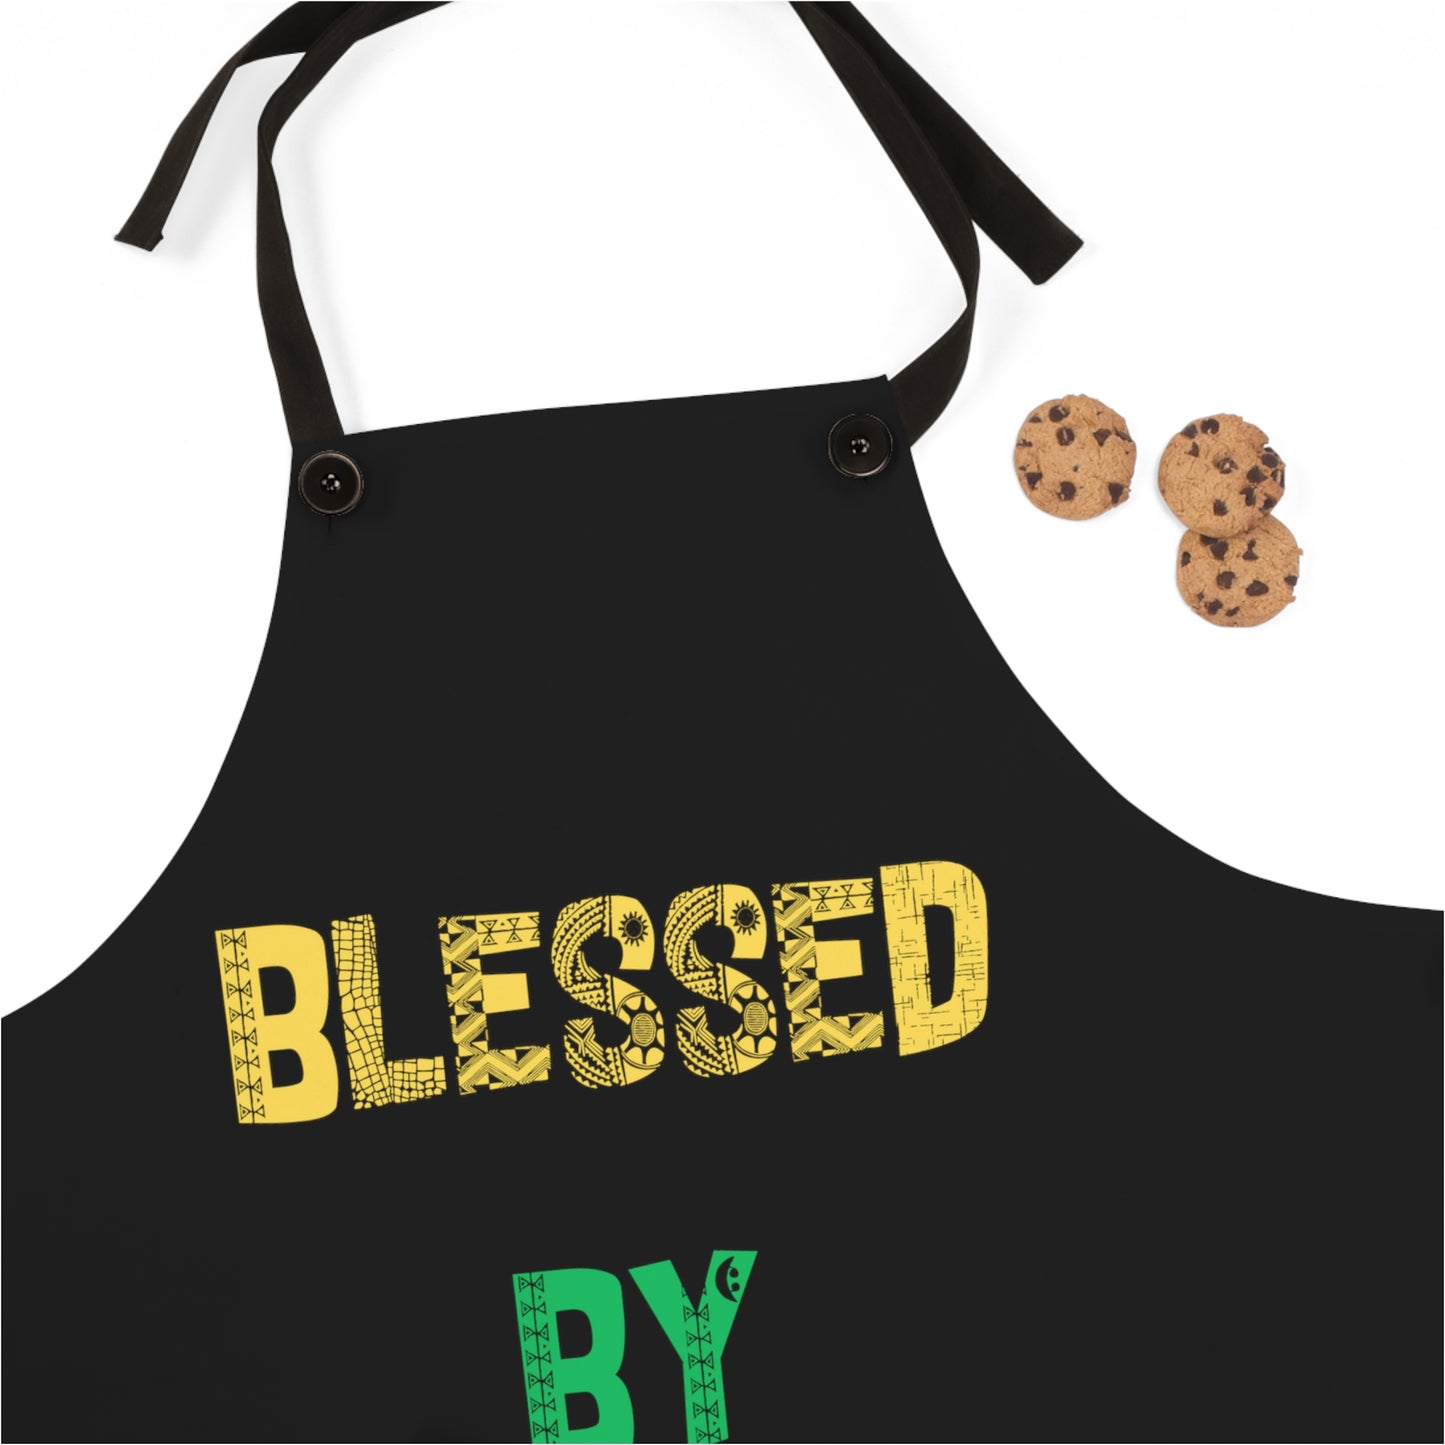 "Blessed by the Ancestors" Apron